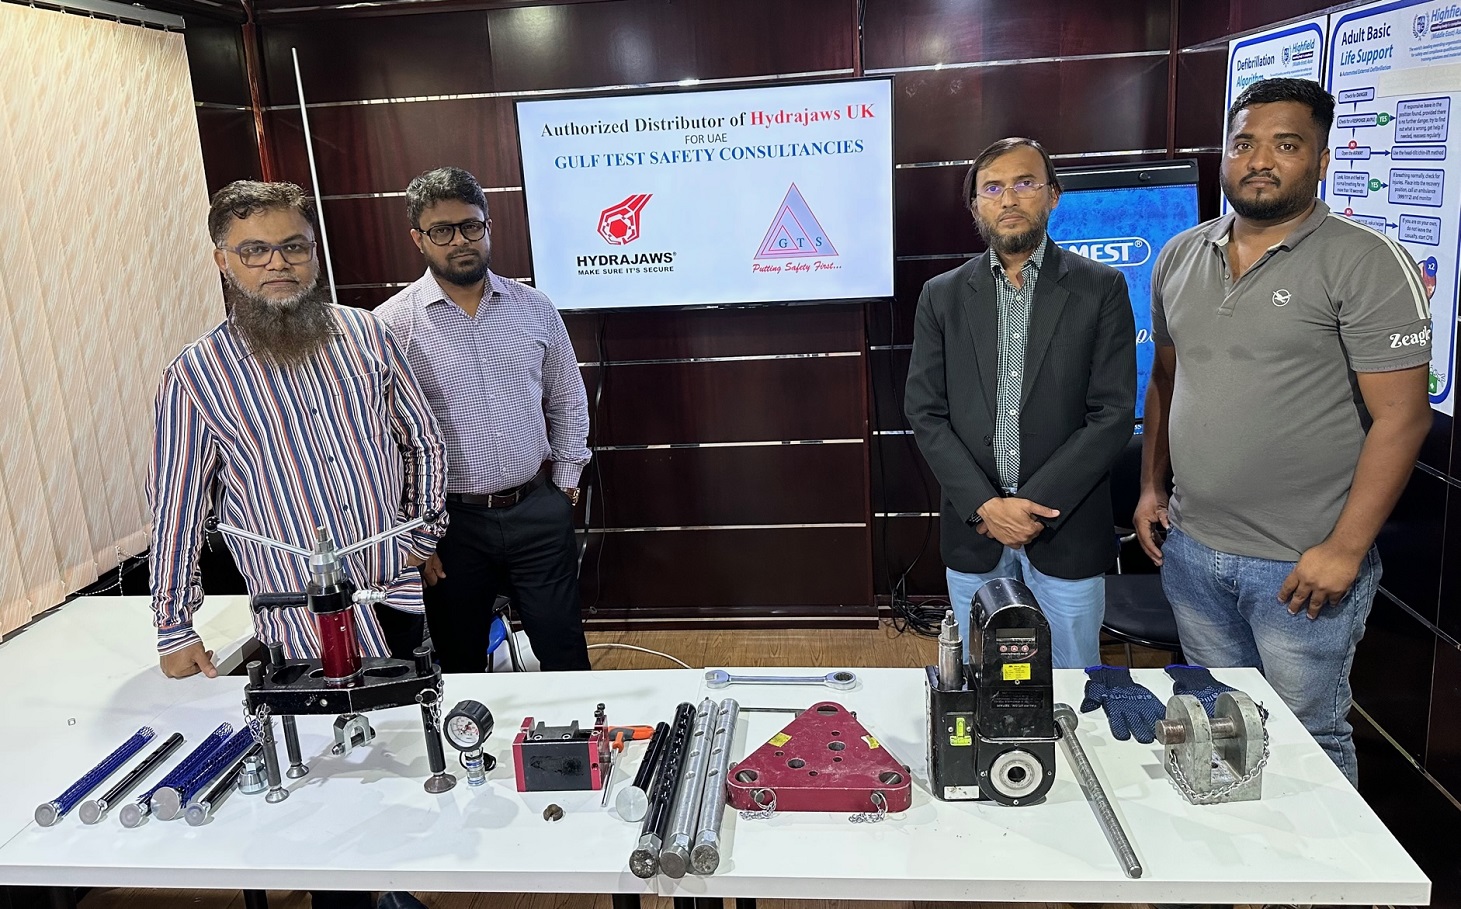 Hydrajaws new Distributor in UAE announced as Gulf Test Safety Consultancies